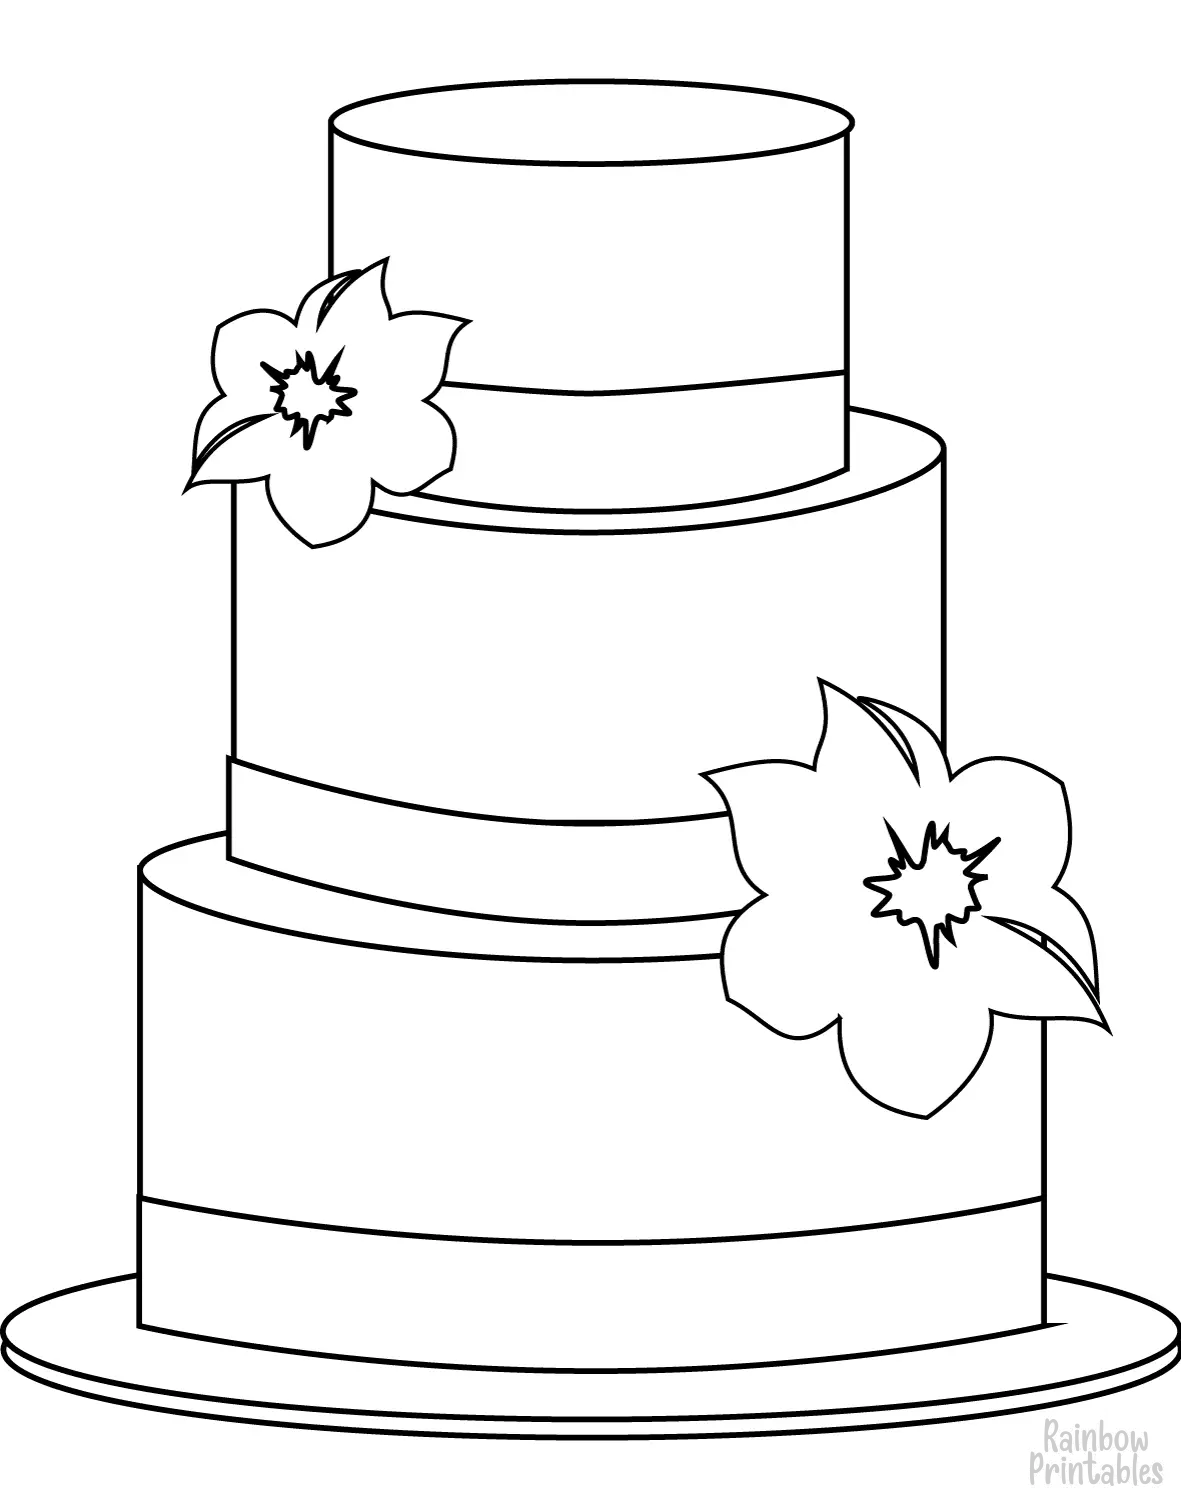 Line Drawing WEDDING CAKE Coloring Pages for Kids Art Project